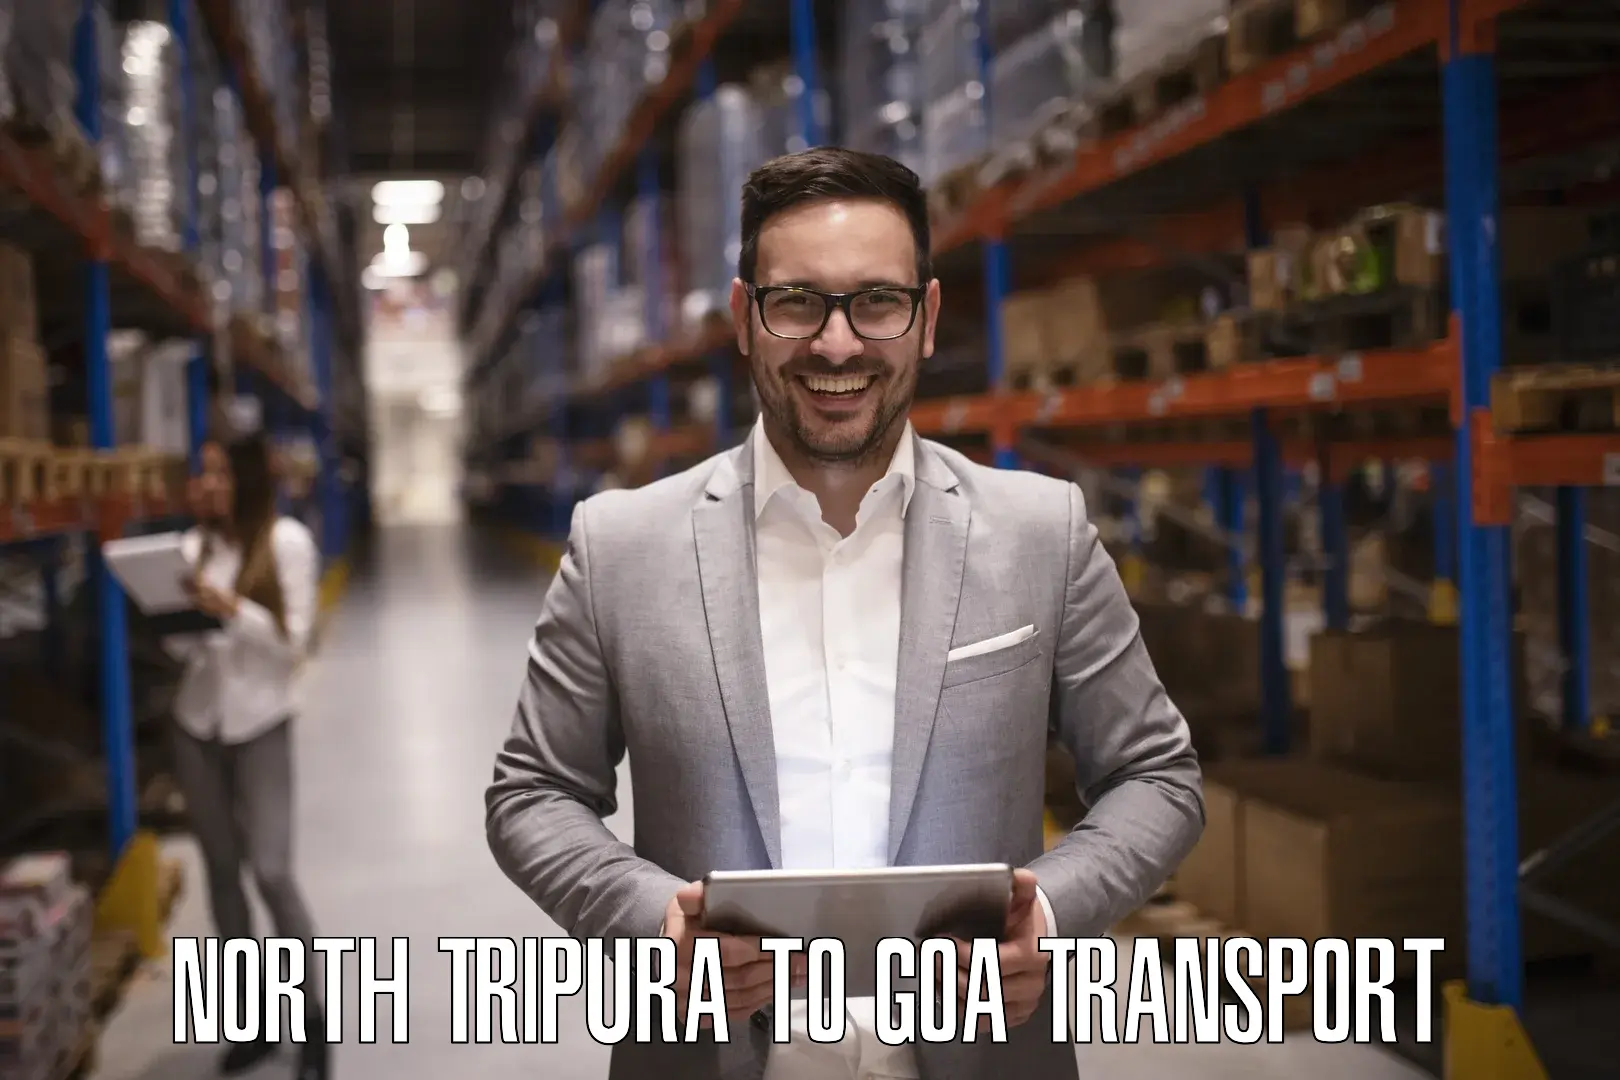 Transportation services in North Tripura to Goa